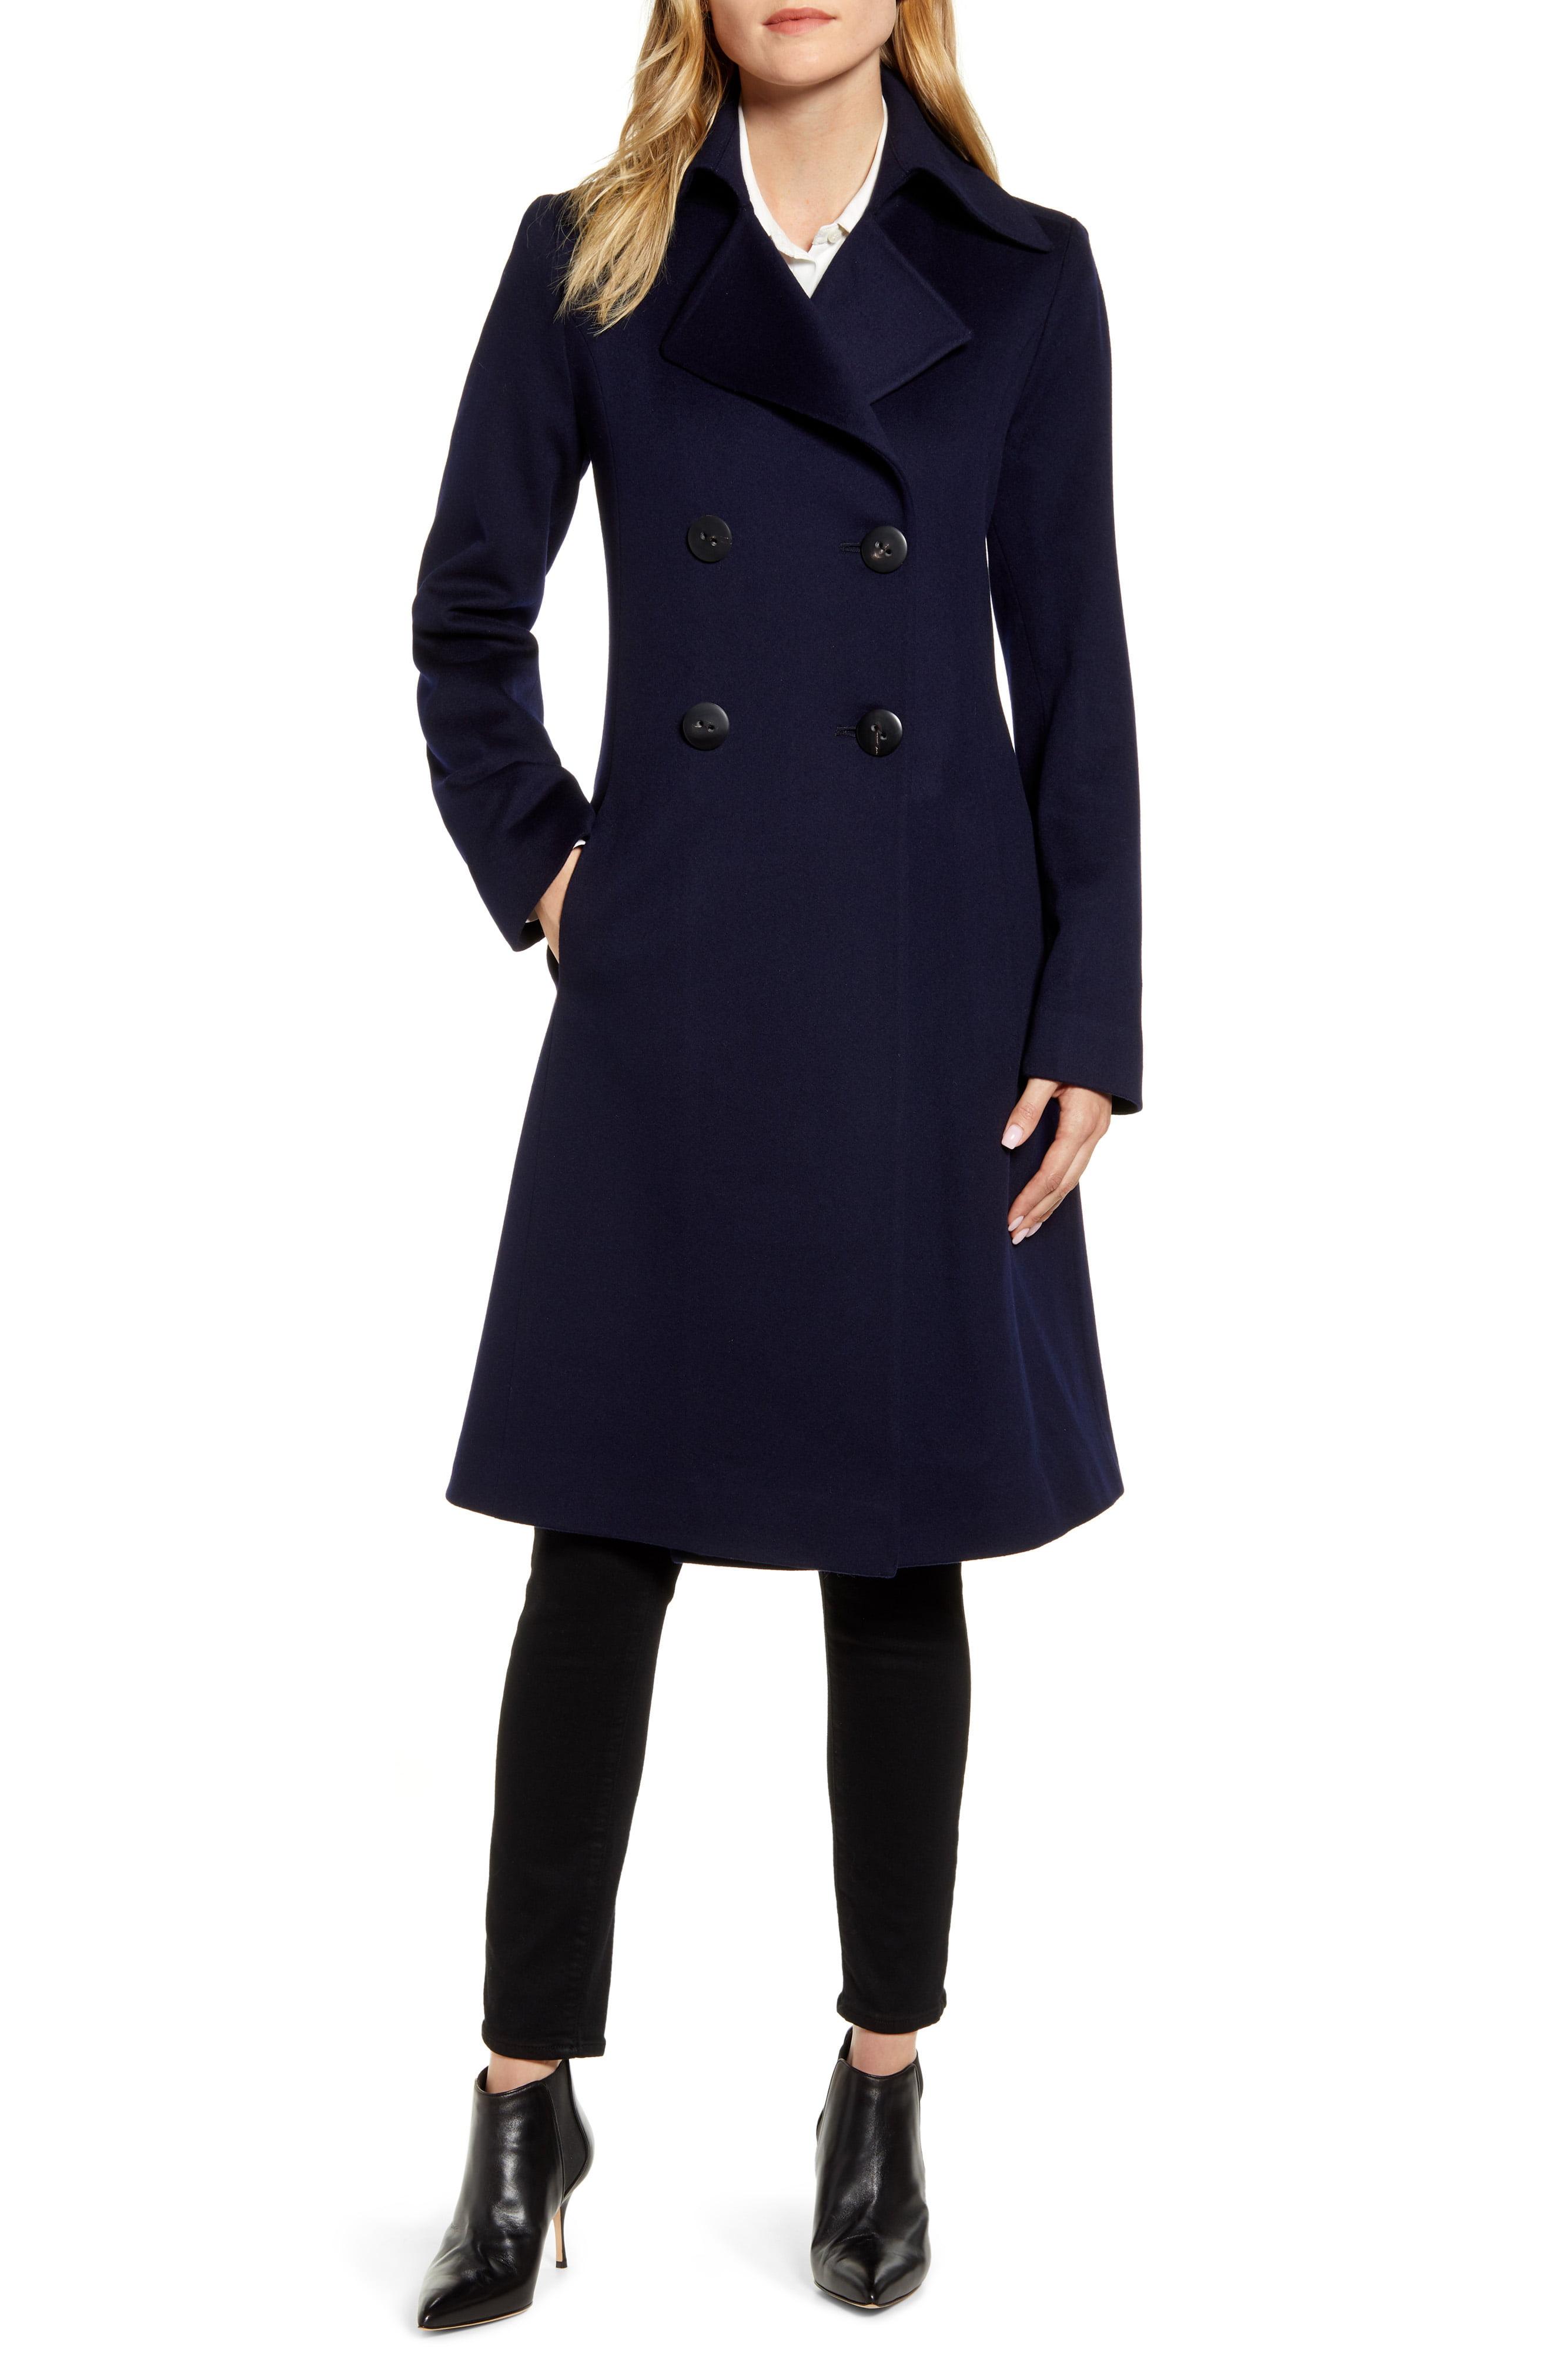 Fleurette Double Breasted Wool Princess Coat in Midnight (Blue) - Lyst